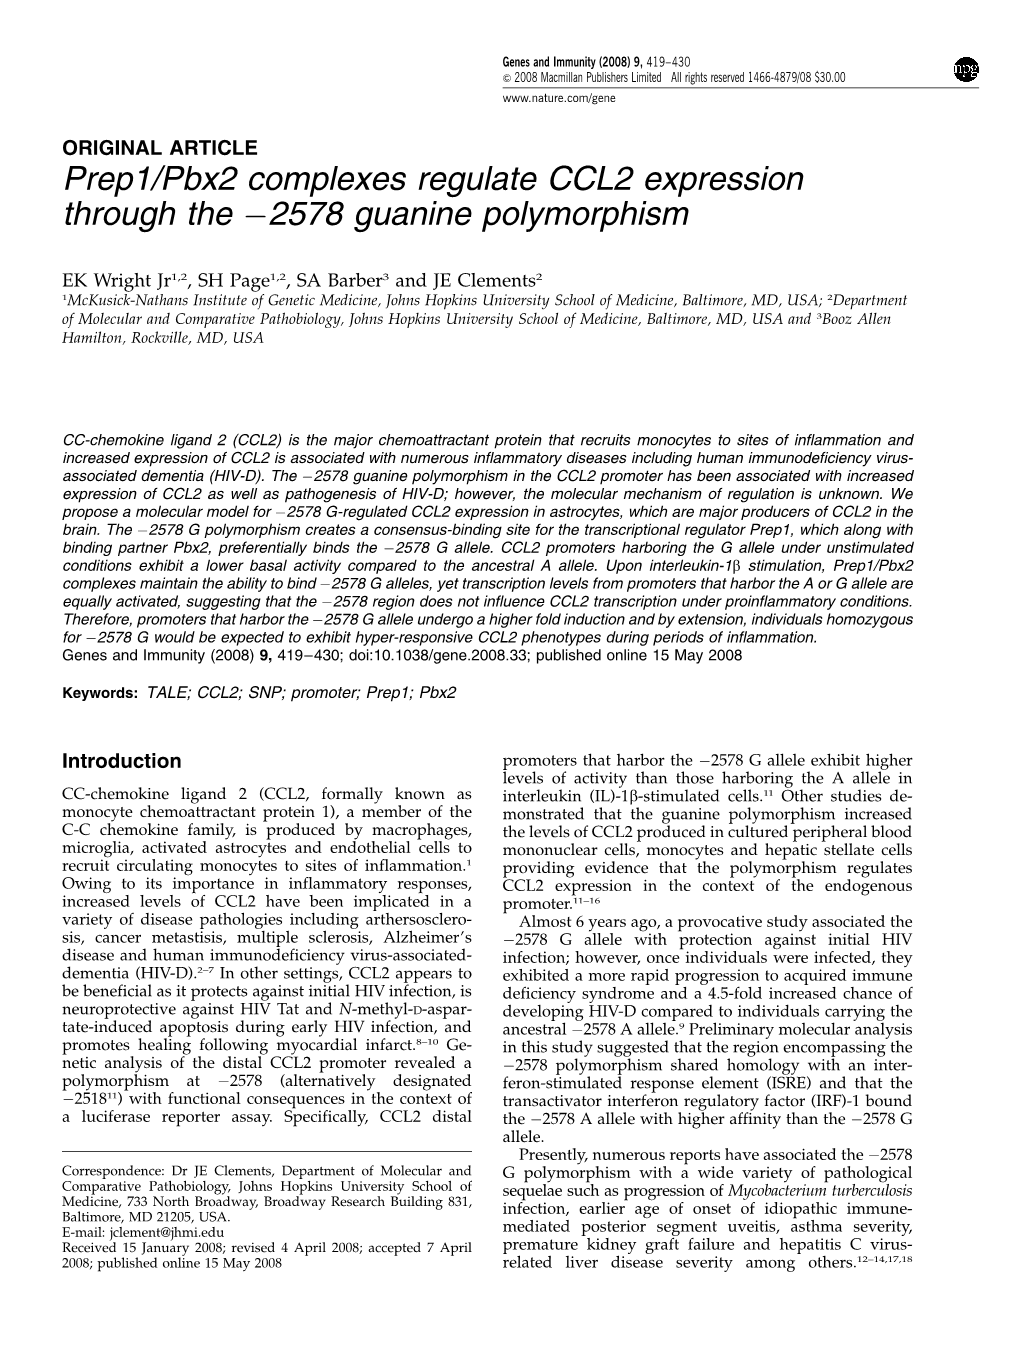 Prep1/Pbx2 Complexes Regulate CCL2 Expression Through the À2578 Guanine Polymorphism